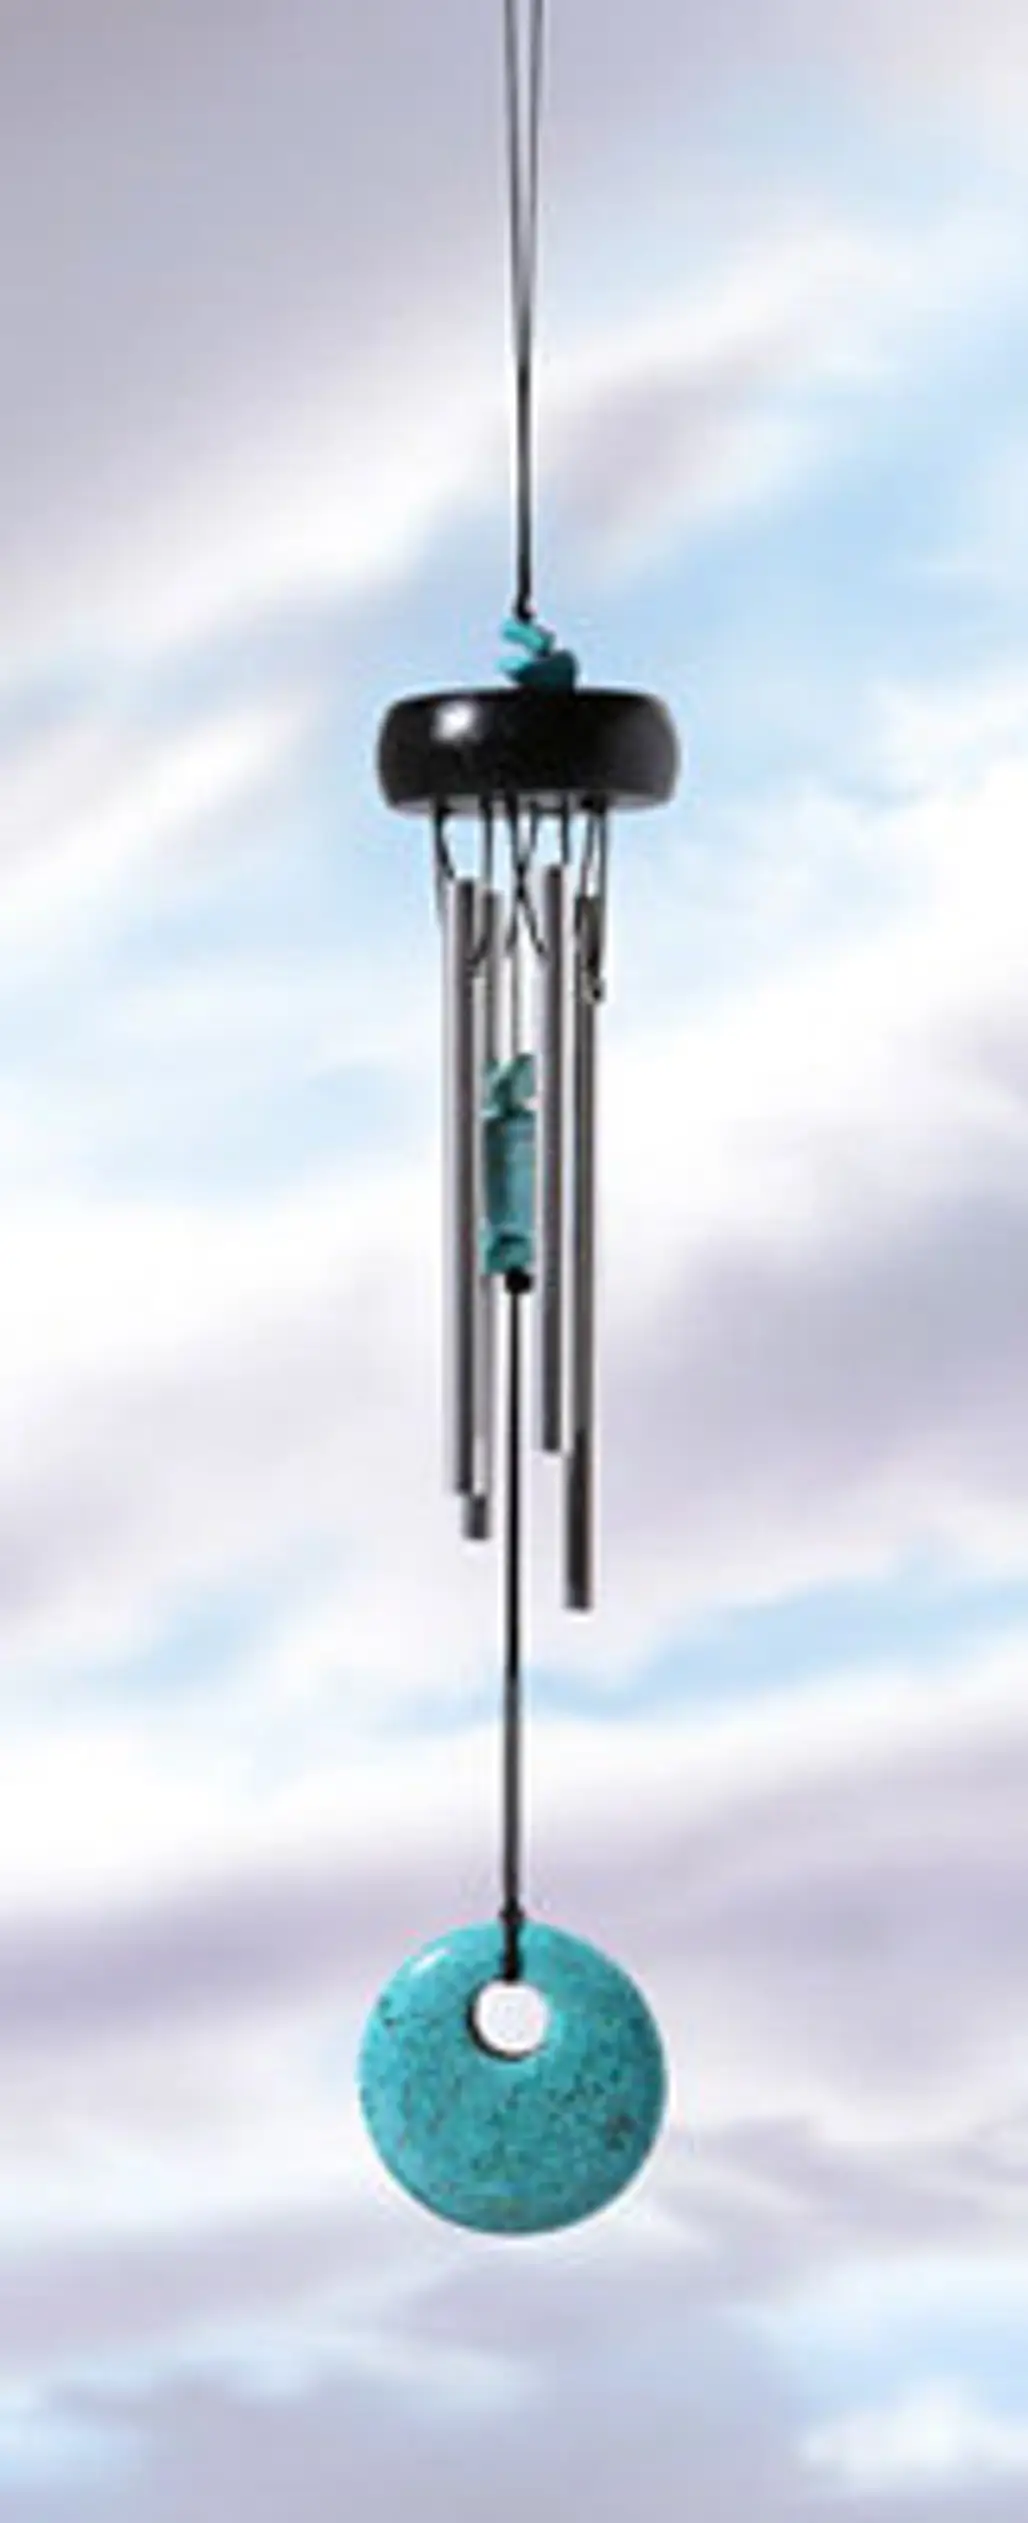 Personal Wind Chime